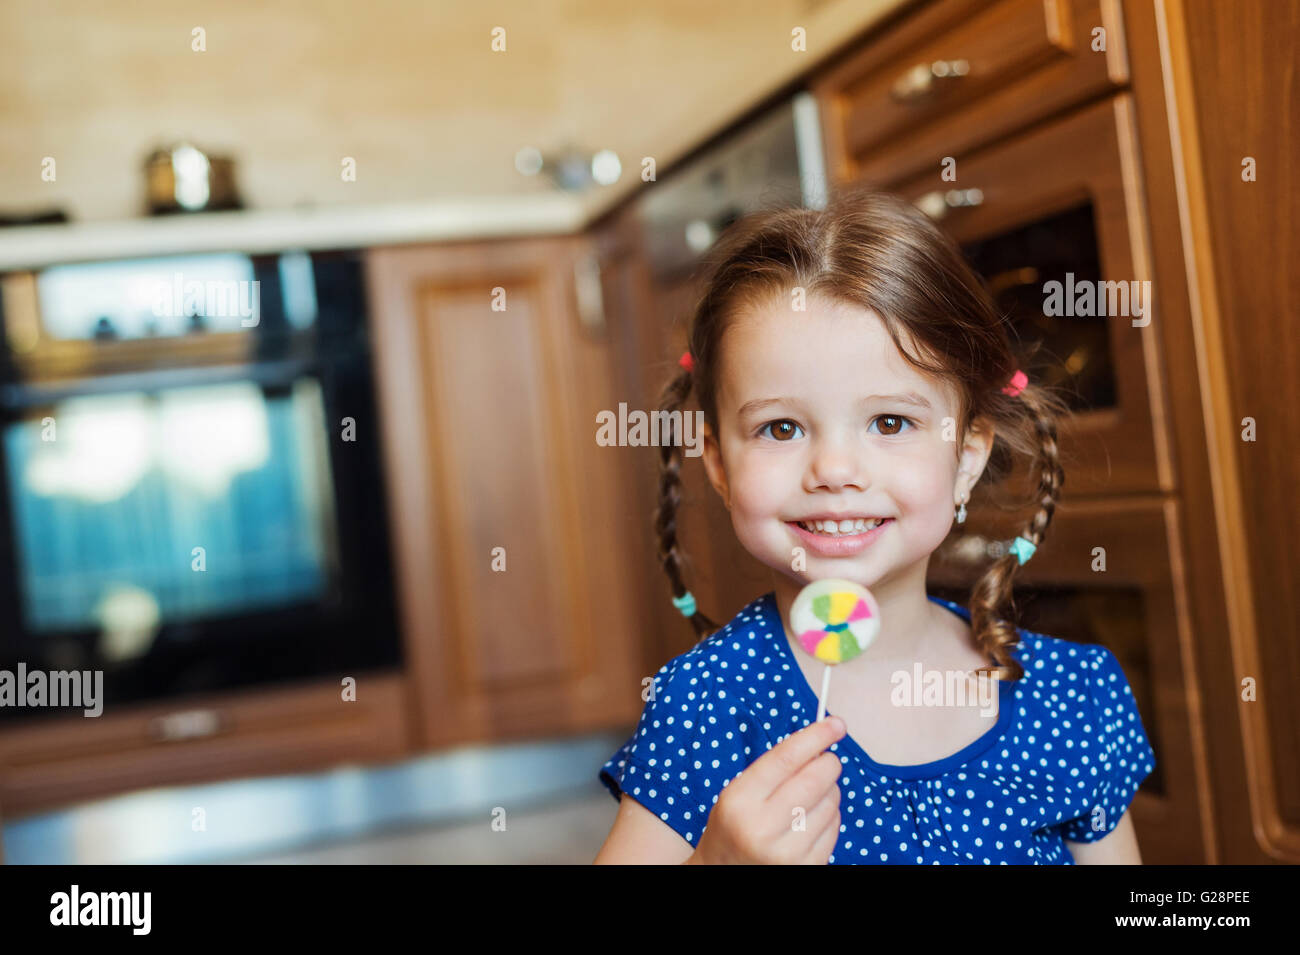 Little girl in the kitchen smiling, eating lollipop Stock Photo